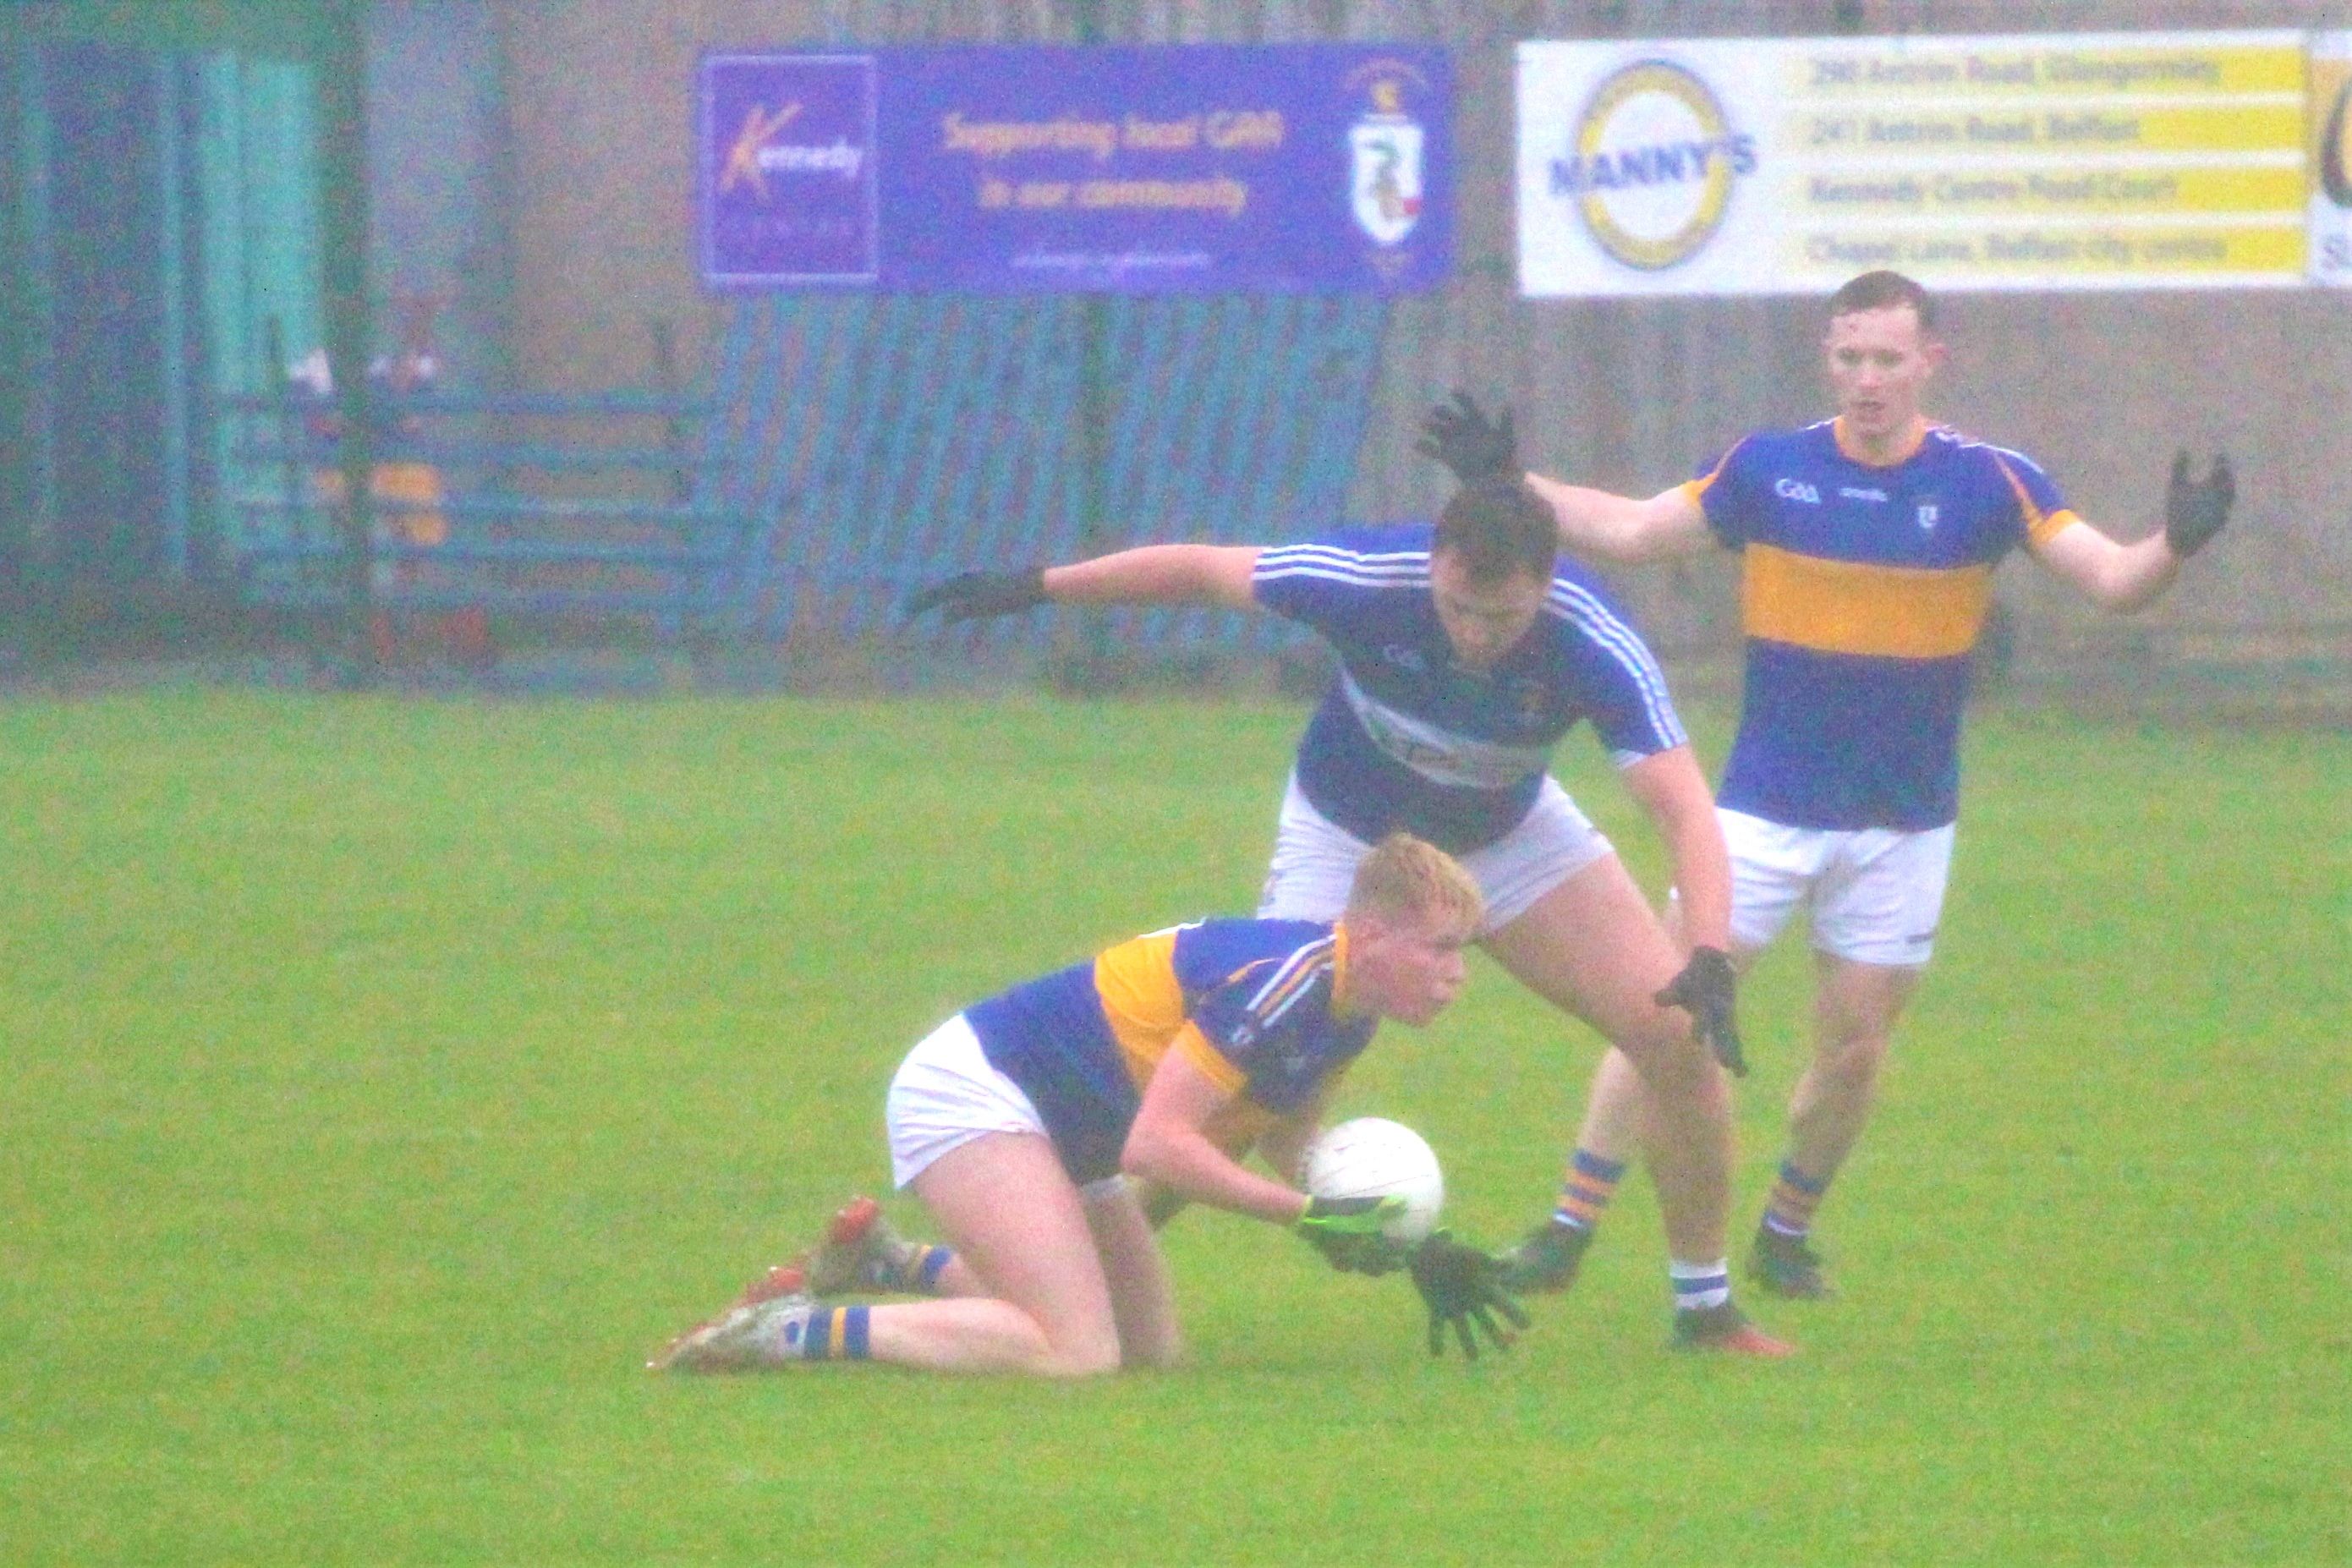 Cormac McGettigan looks for a pass as Domhnall Nugent challenges